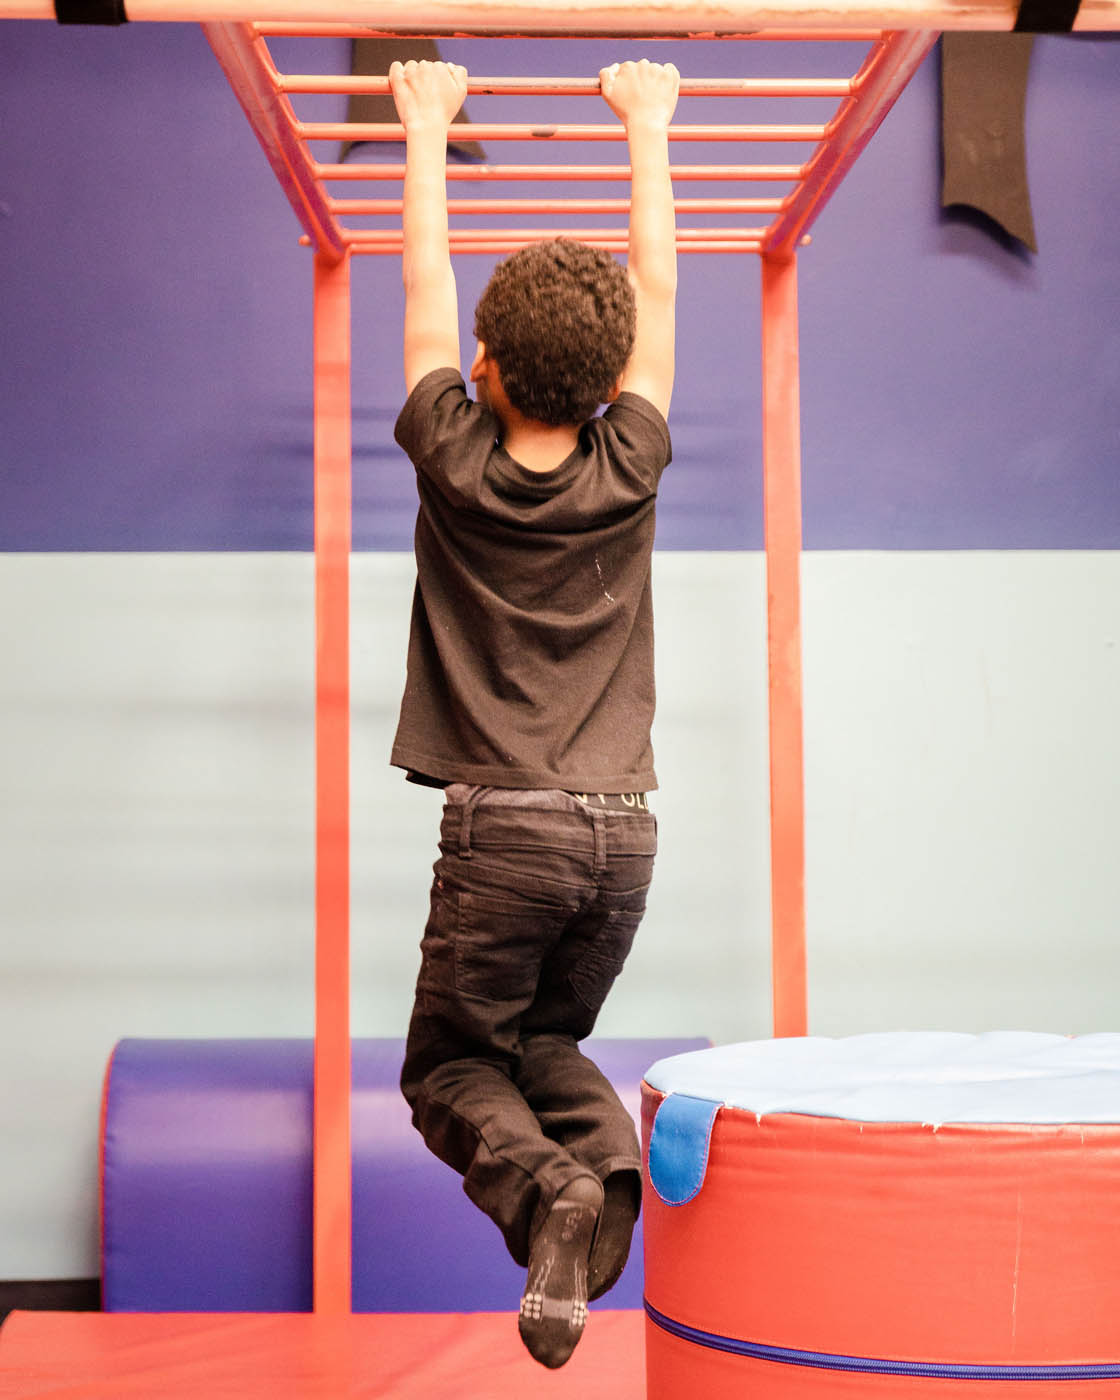 A little boy hanging on monkey bars, contact us today about our baby groups in St. Petersburg, FL.